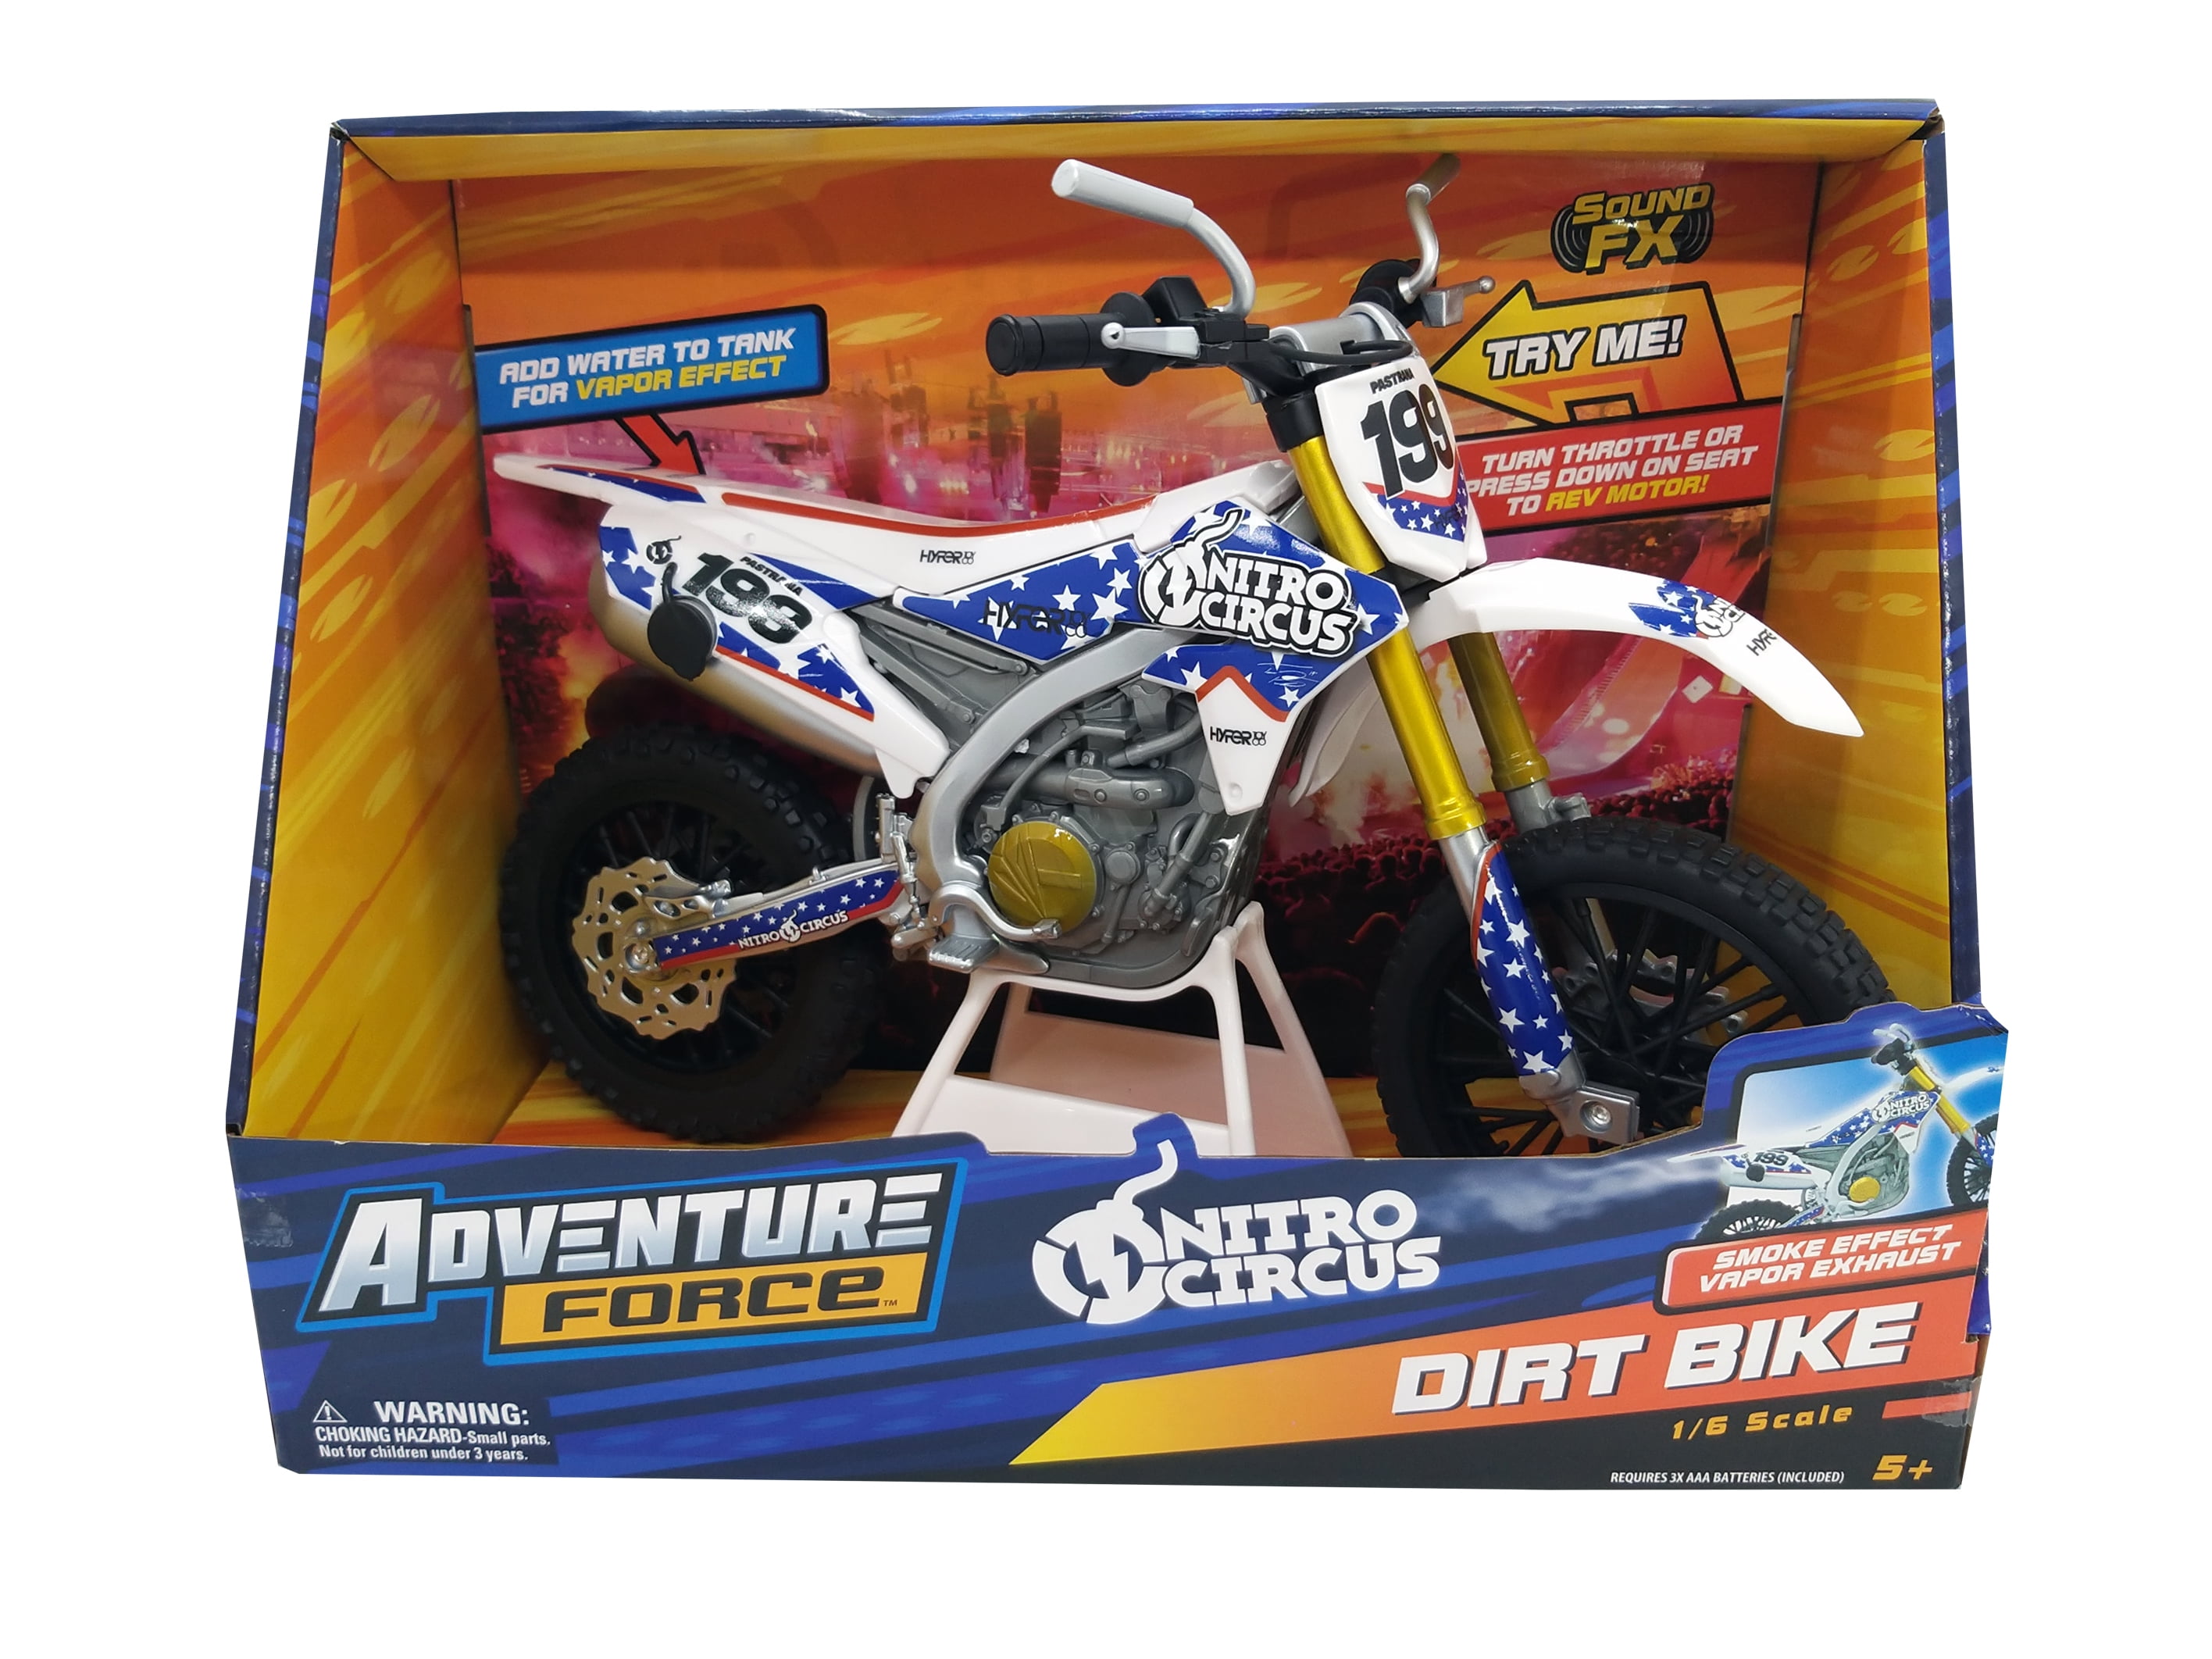 Adventure Force 16 Scale Motorcycle Play Vehicle for Kids with Authentic Nitro Circus Travis Pastrana Graphics